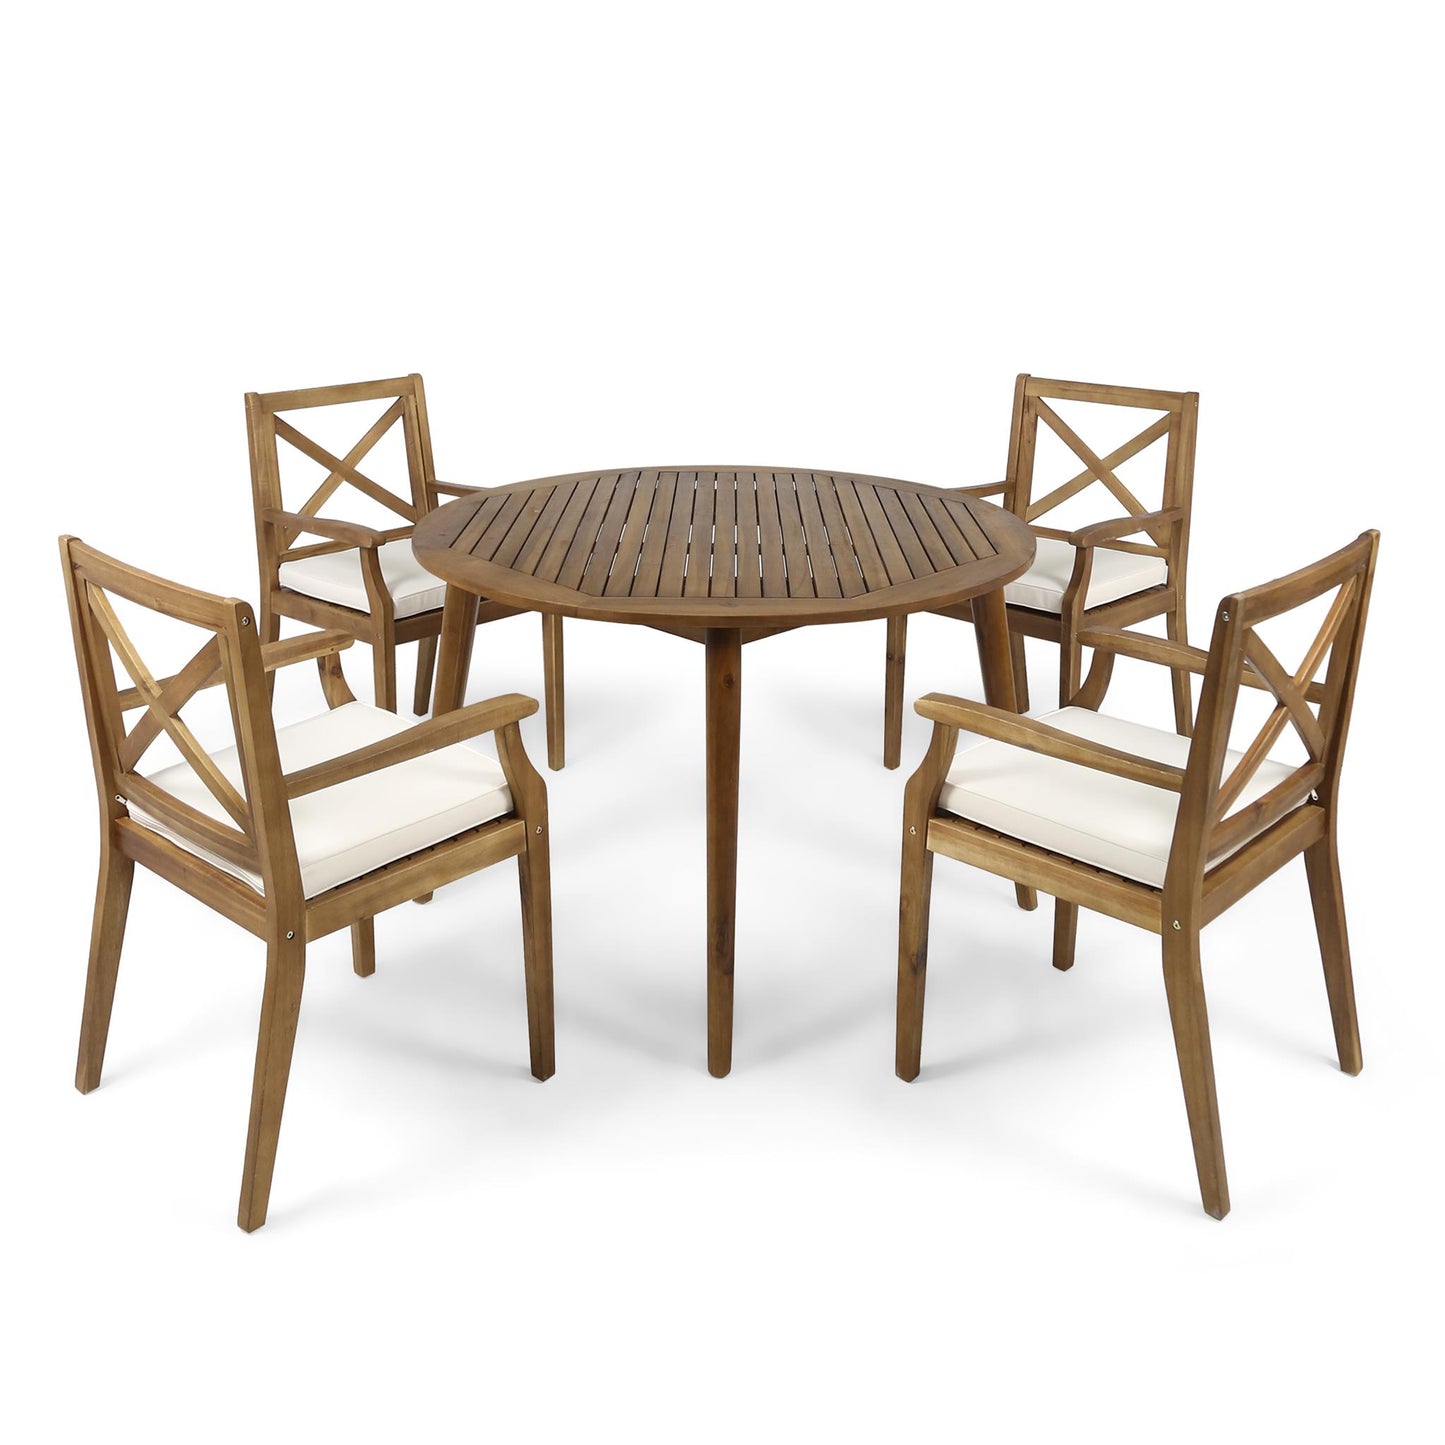 Jenson Outdoor 5 Piece Acacia Wood Dining Set with Cushions